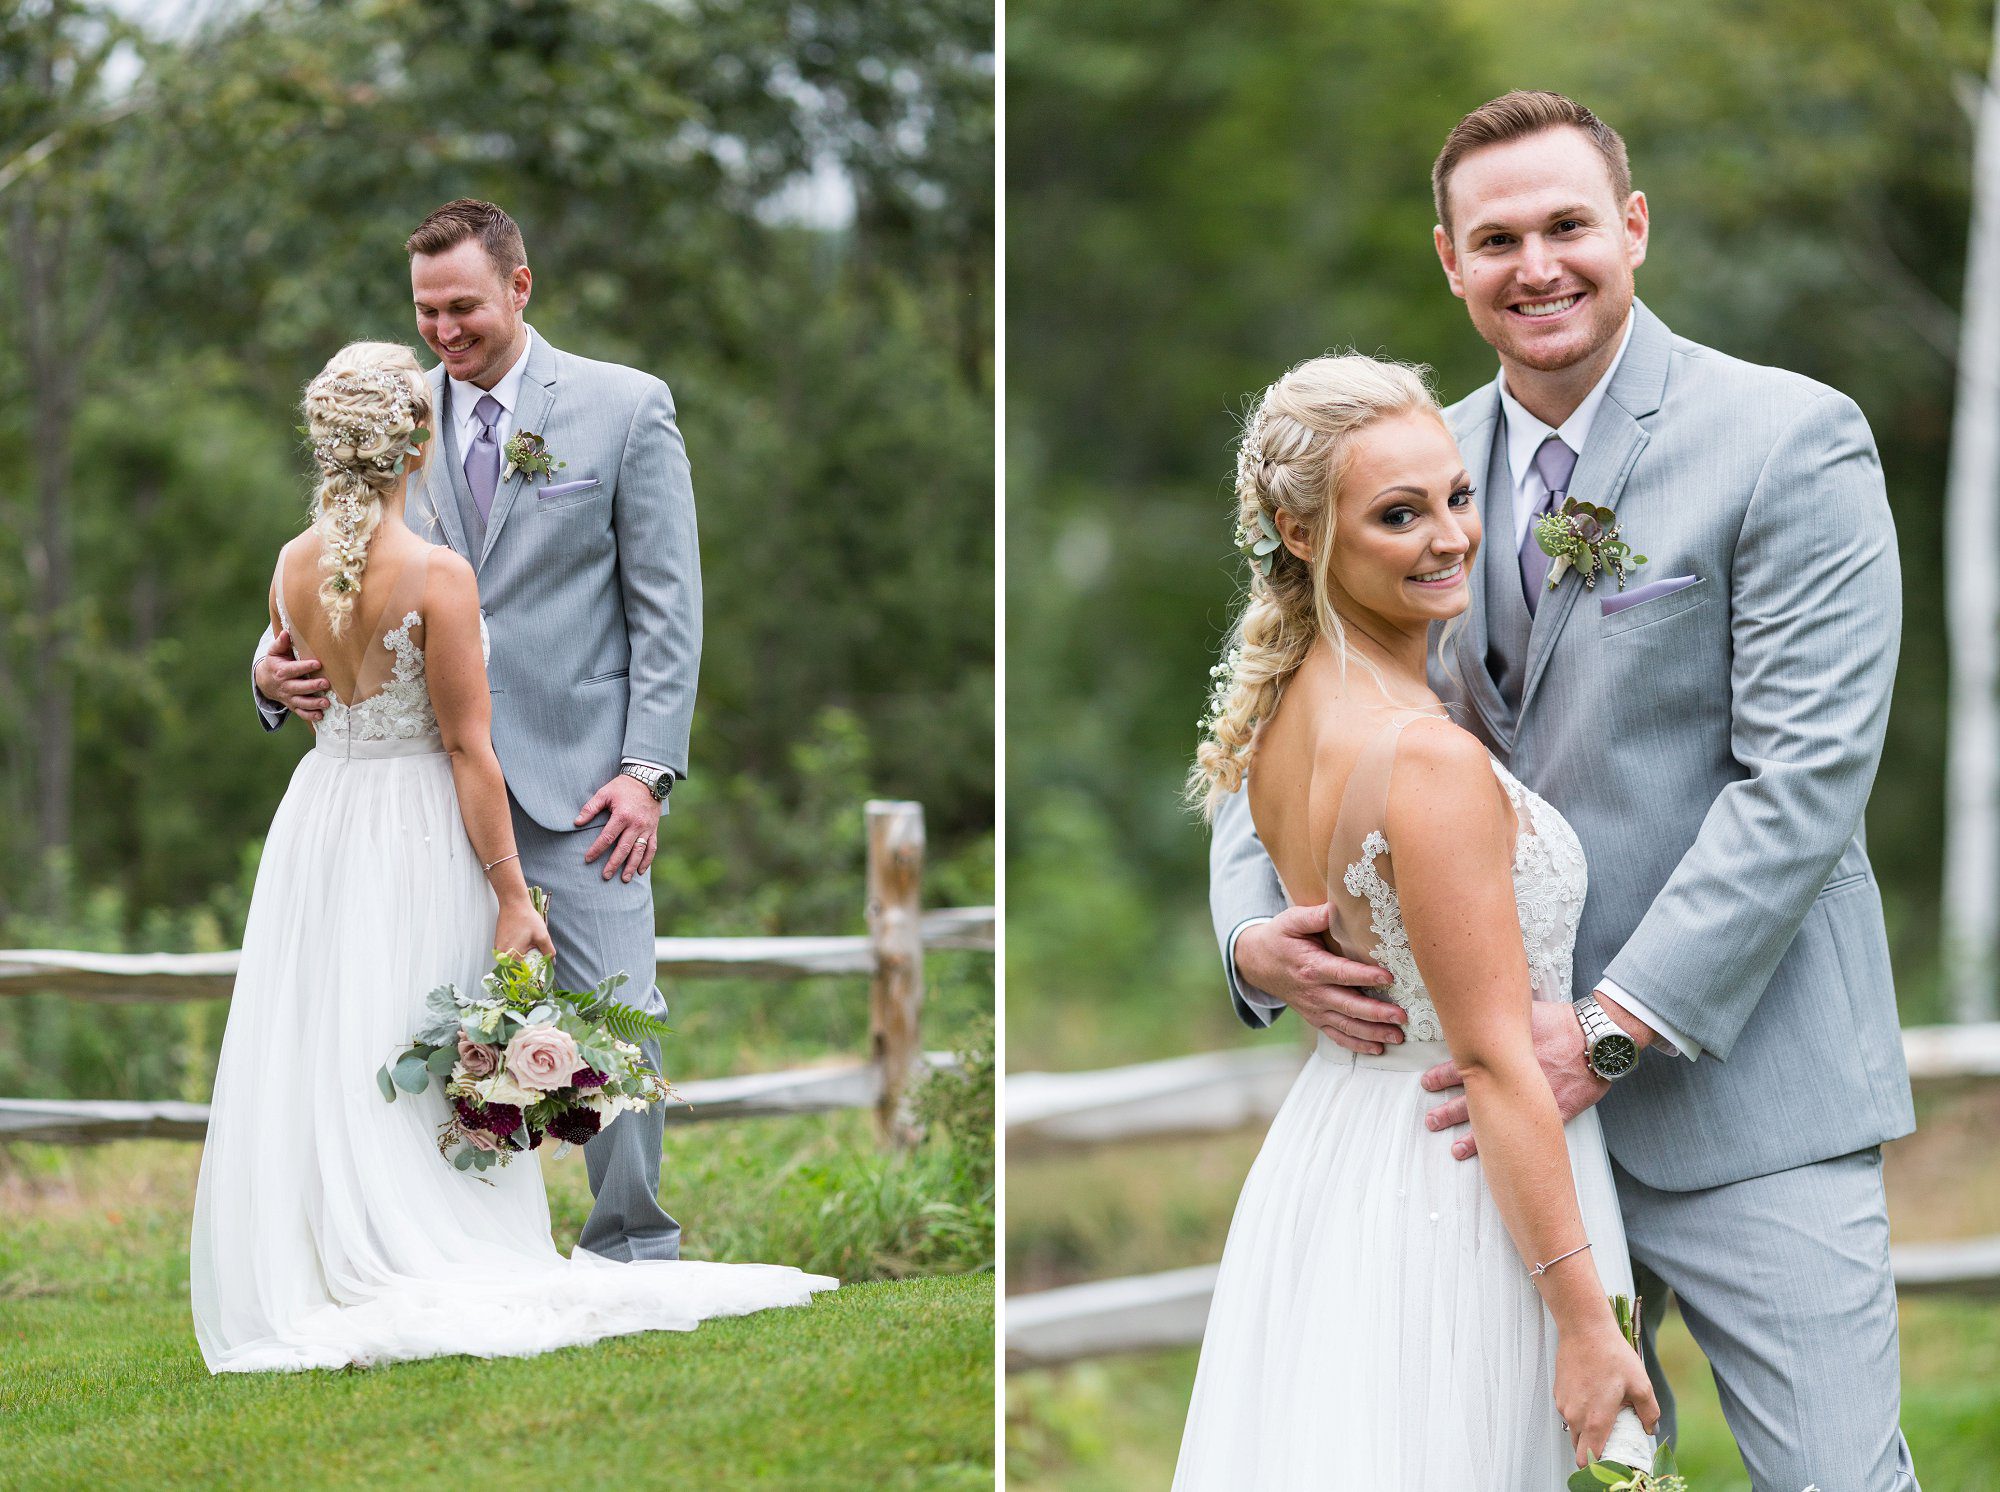 Bridal portraits at the Barn on the Pemi | Plymouth NH Wedding Photographer